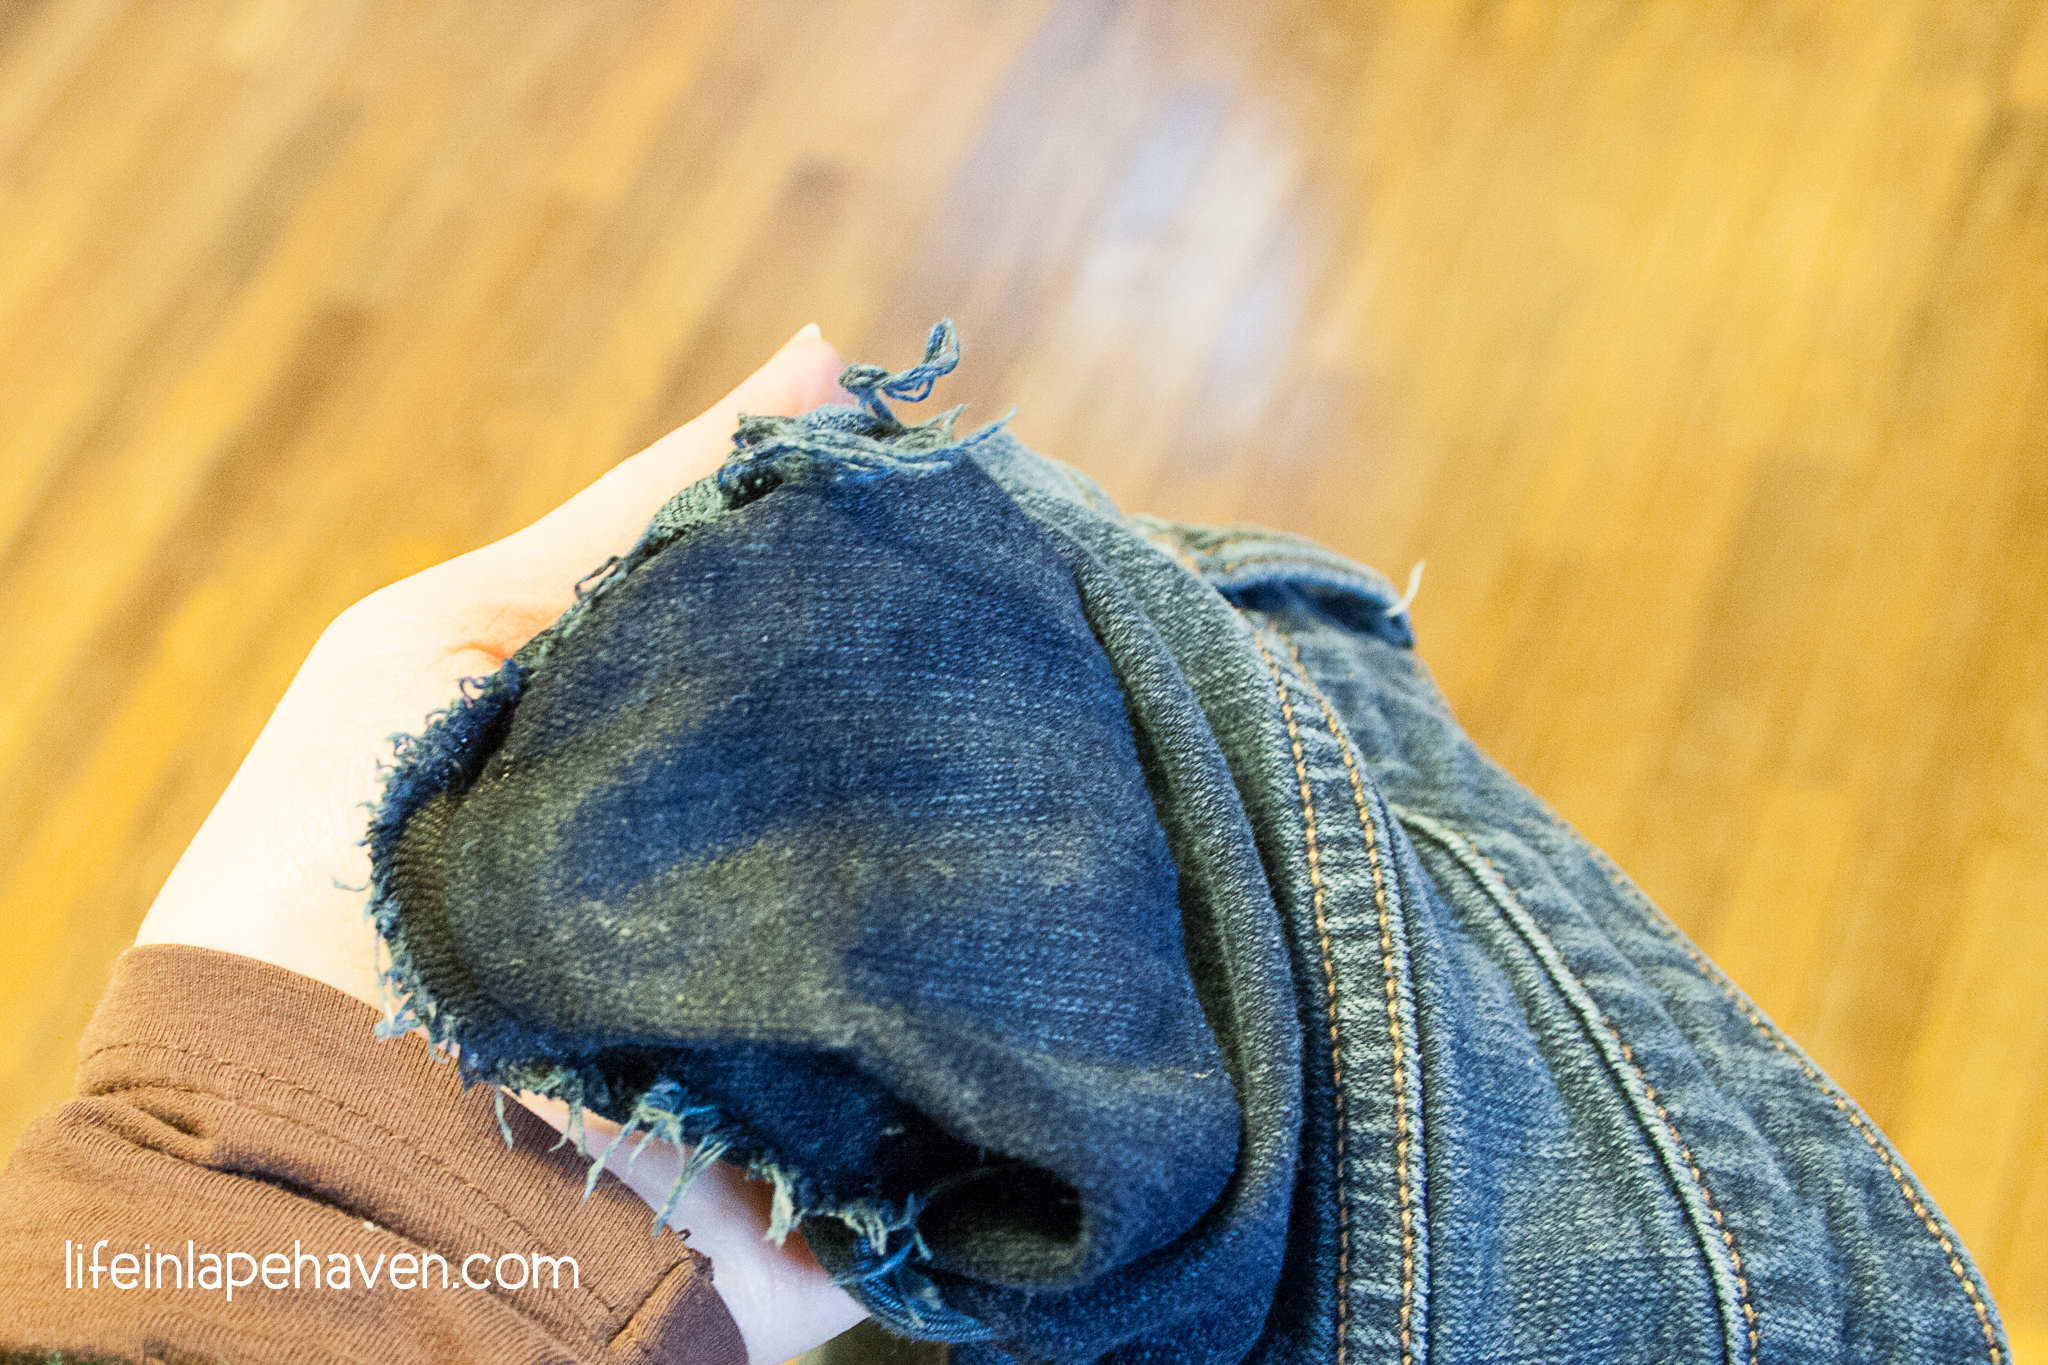 How To Remove Putty From Fabric A Ridiculously Simple Way to Get Silly Putty Out of Fabric